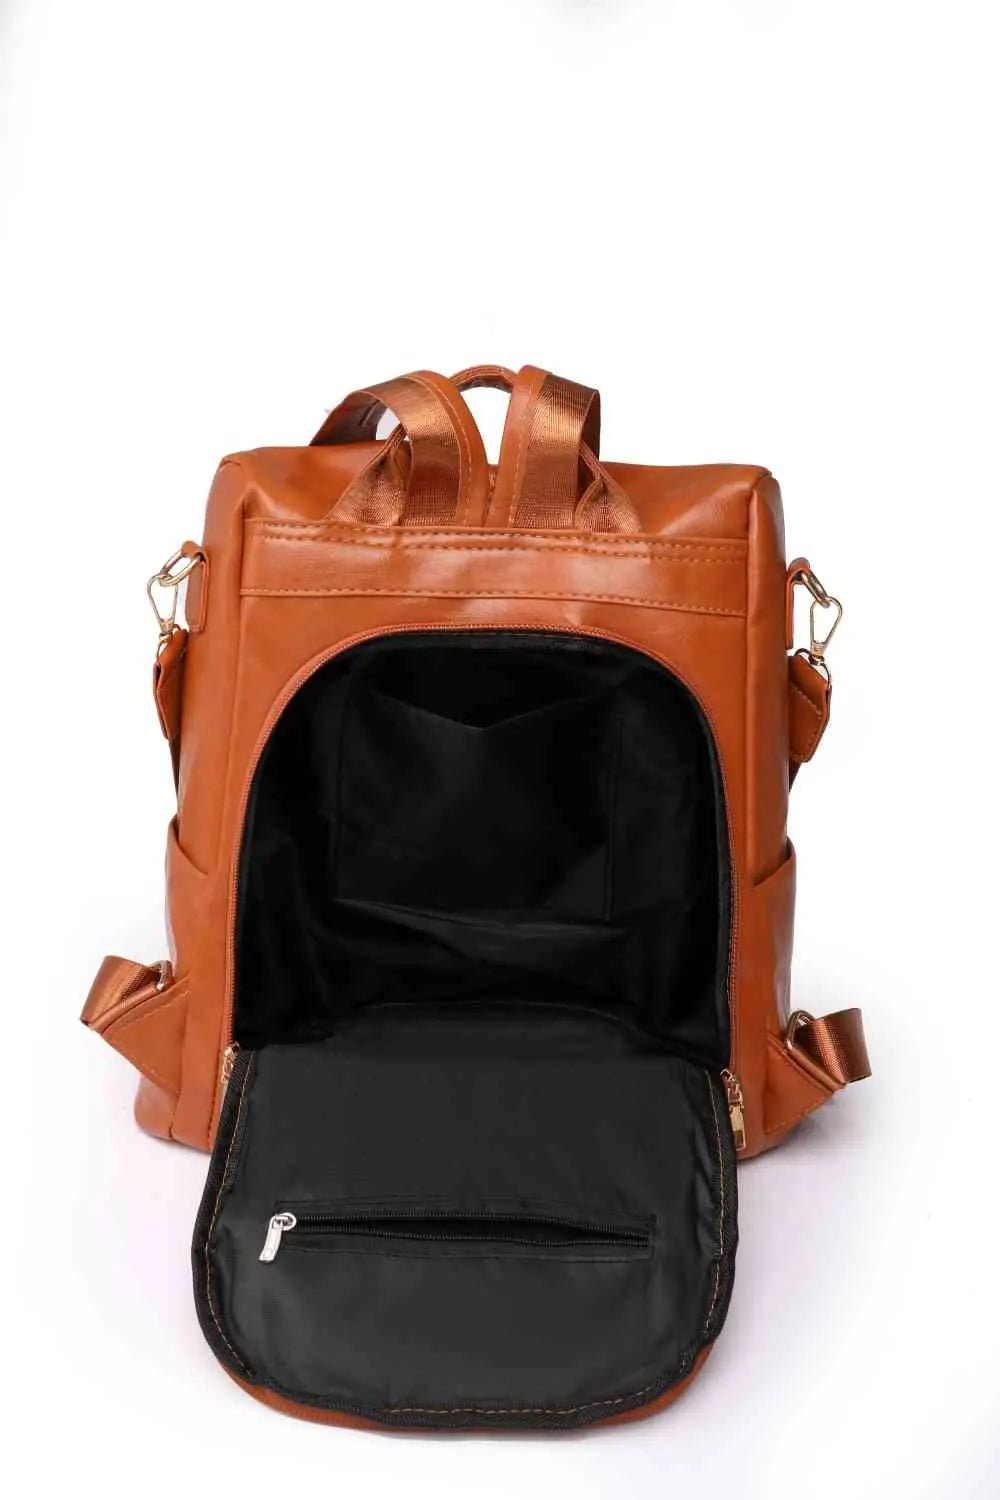 Discover Chic Functionality with the Marcy Zipper Pocket Backpack | Vegan Leather and Spacious Interior